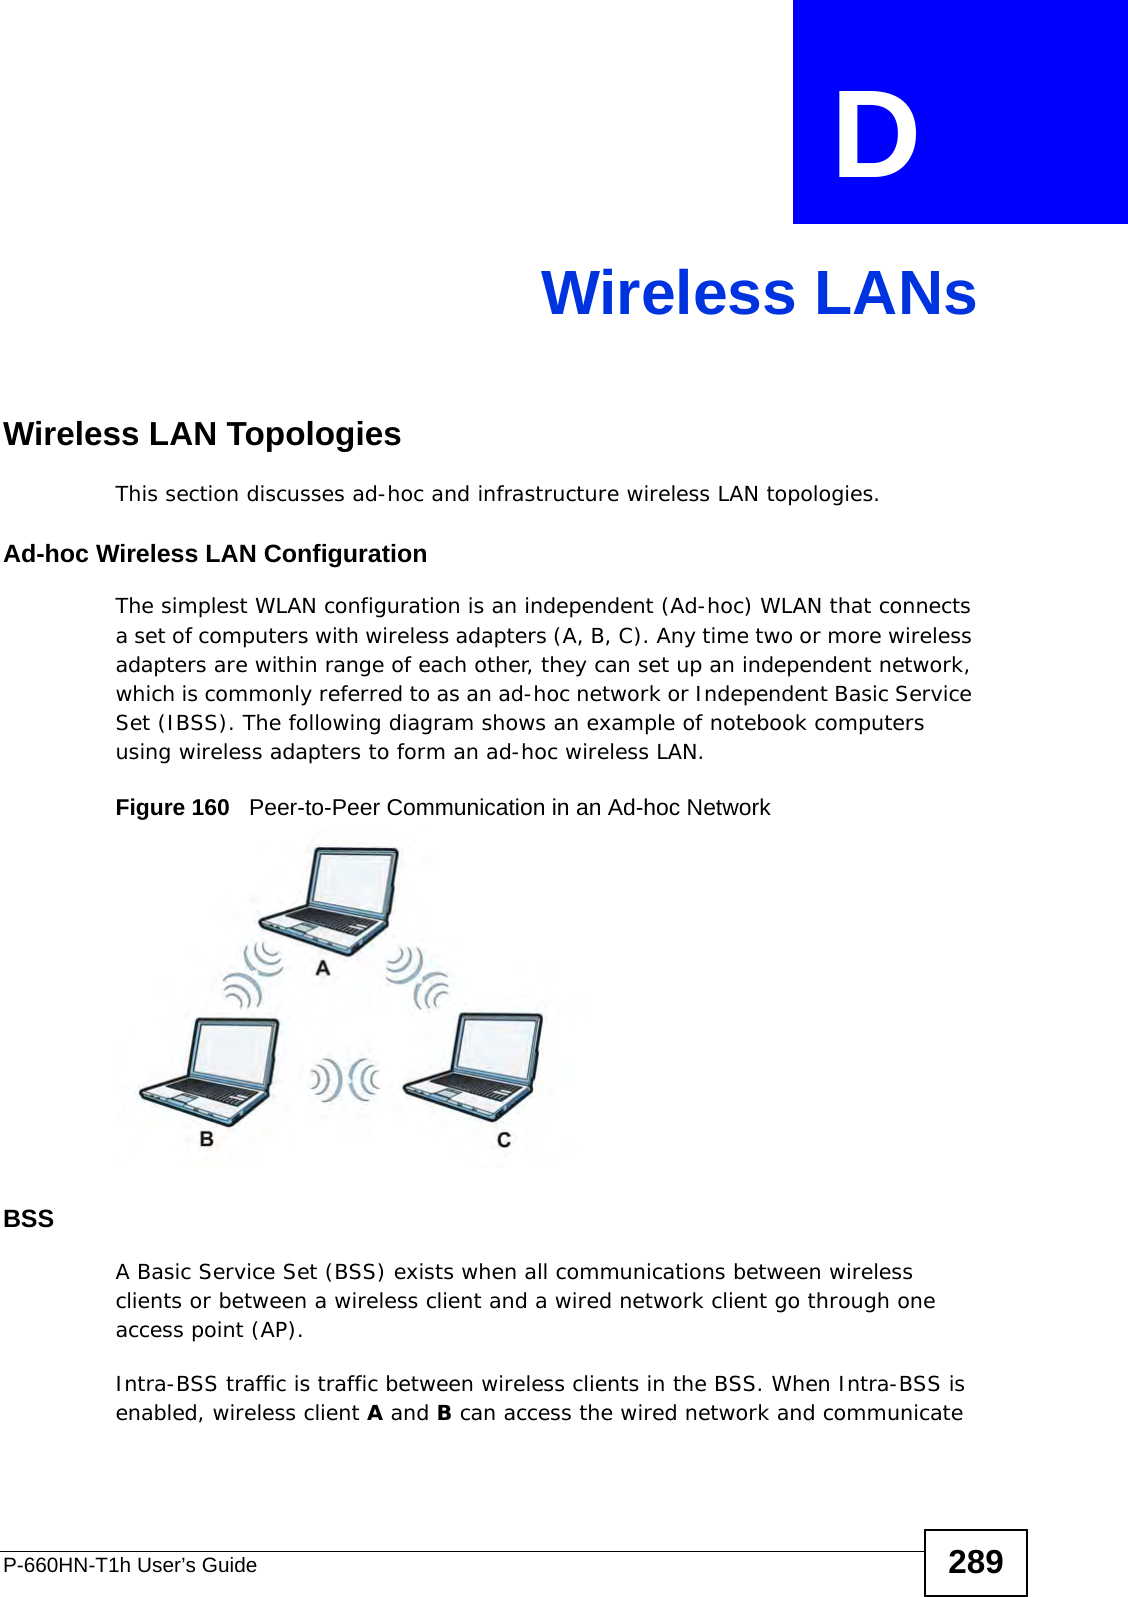 P-660HN-T1h User’s Guide 289APPENDIX  D Wireless LANsWireless LAN TopologiesThis section discusses ad-hoc and infrastructure wireless LAN topologies.Ad-hoc Wireless LAN ConfigurationThe simplest WLAN configuration is an independent (Ad-hoc) WLAN that connects a set of computers with wireless adapters (A, B, C). Any time two or more wireless adapters are within range of each other, they can set up an independent network, which is commonly referred to as an ad-hoc network or Independent Basic Service Set (IBSS). The following diagram shows an example of notebook computers using wireless adapters to form an ad-hoc wireless LAN. Figure 160   Peer-to-Peer Communication in an Ad-hoc NetworkBSSA Basic Service Set (BSS) exists when all communications between wireless clients or between a wireless client and a wired network client go through one access point (AP). Intra-BSS traffic is traffic between wireless clients in the BSS. When Intra-BSS is enabled, wireless client A and B can access the wired network and communicate 